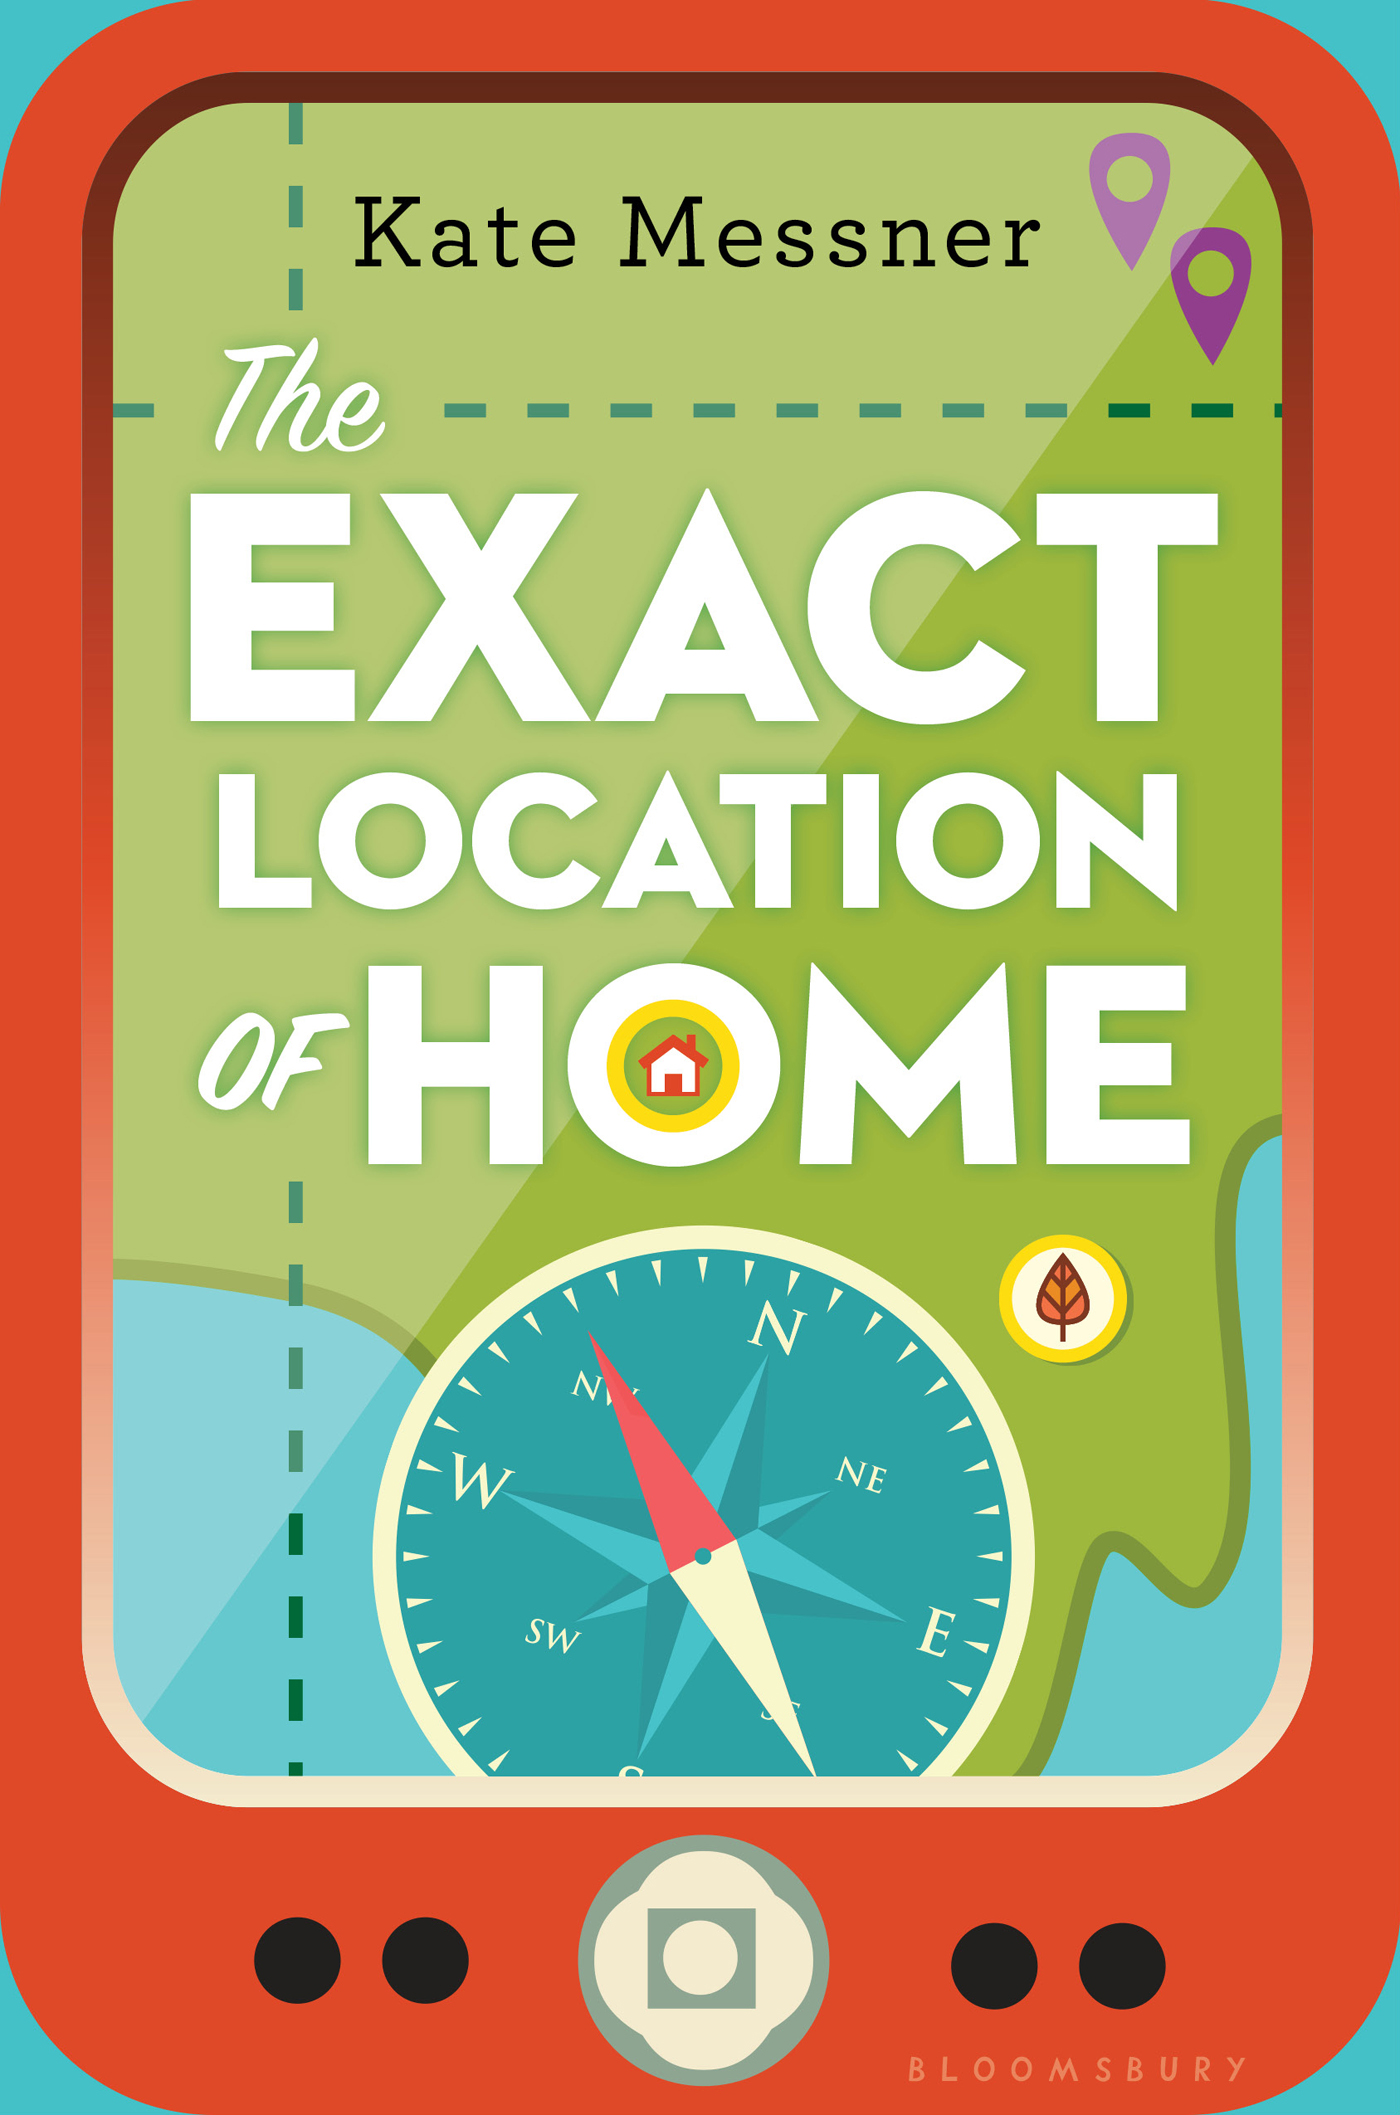 The Exact Location of Home (2014) by Kate Messner